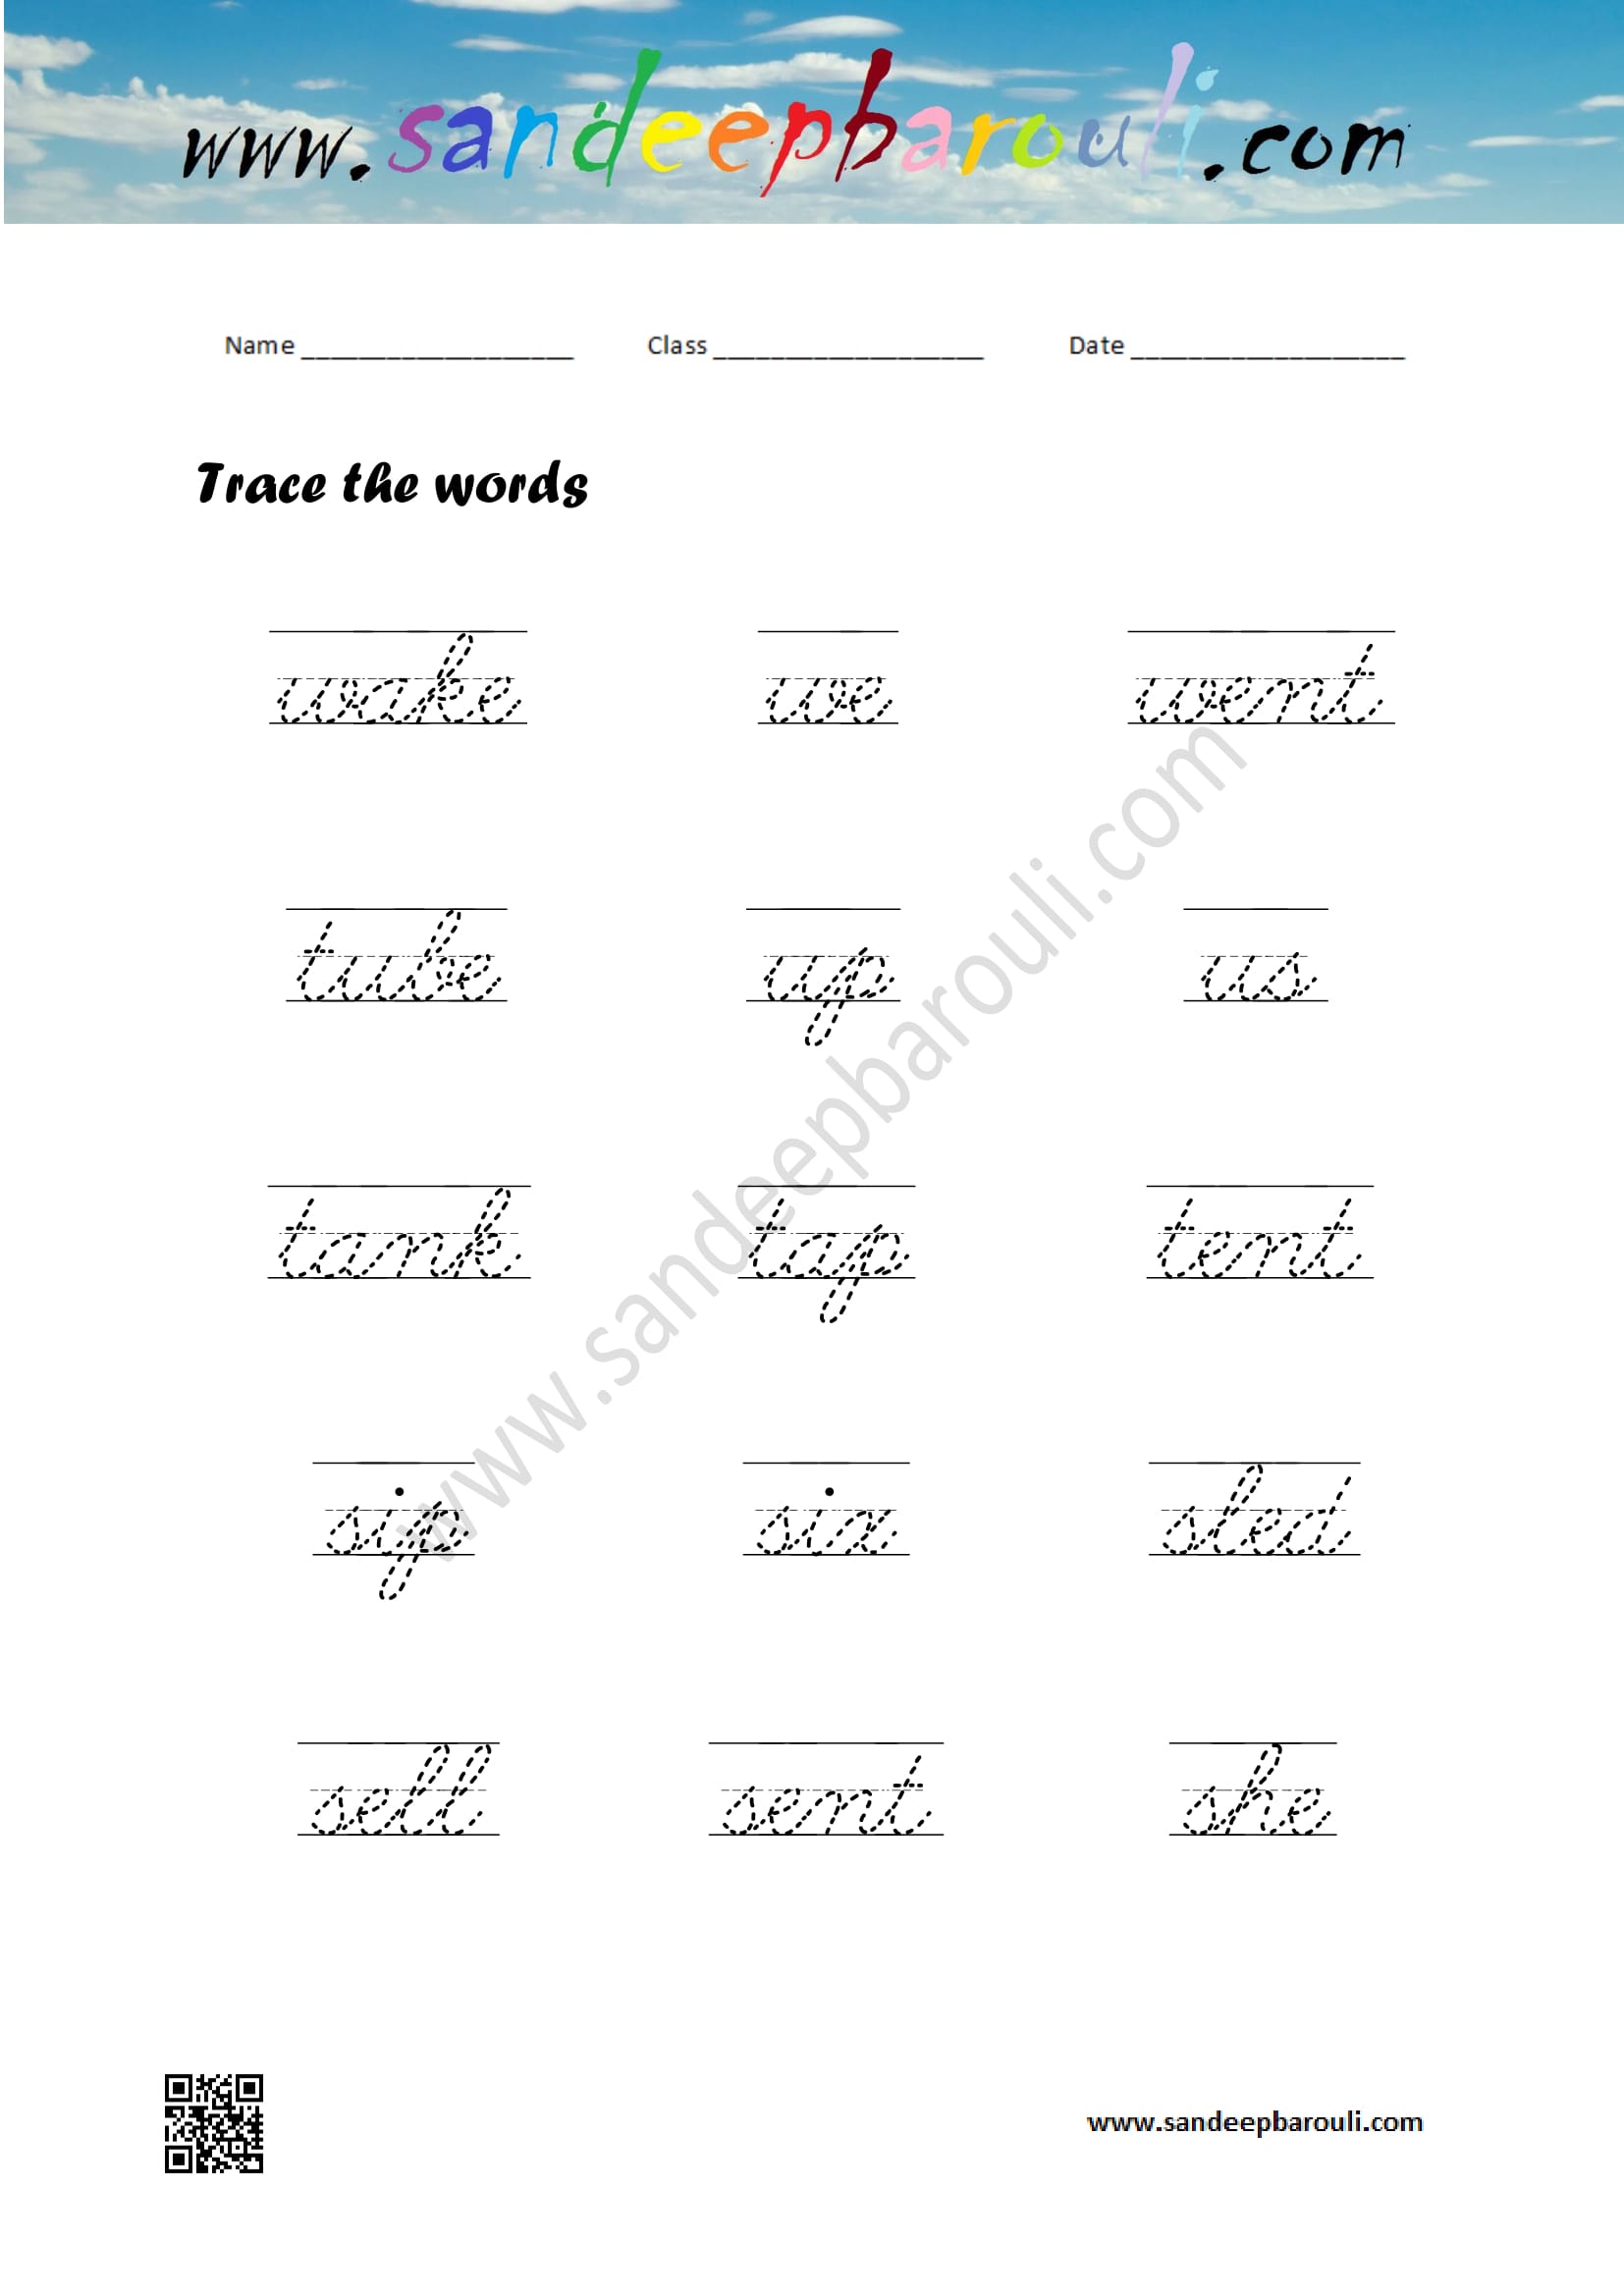 Cursive Writing Worksheet – Trace the words (12)